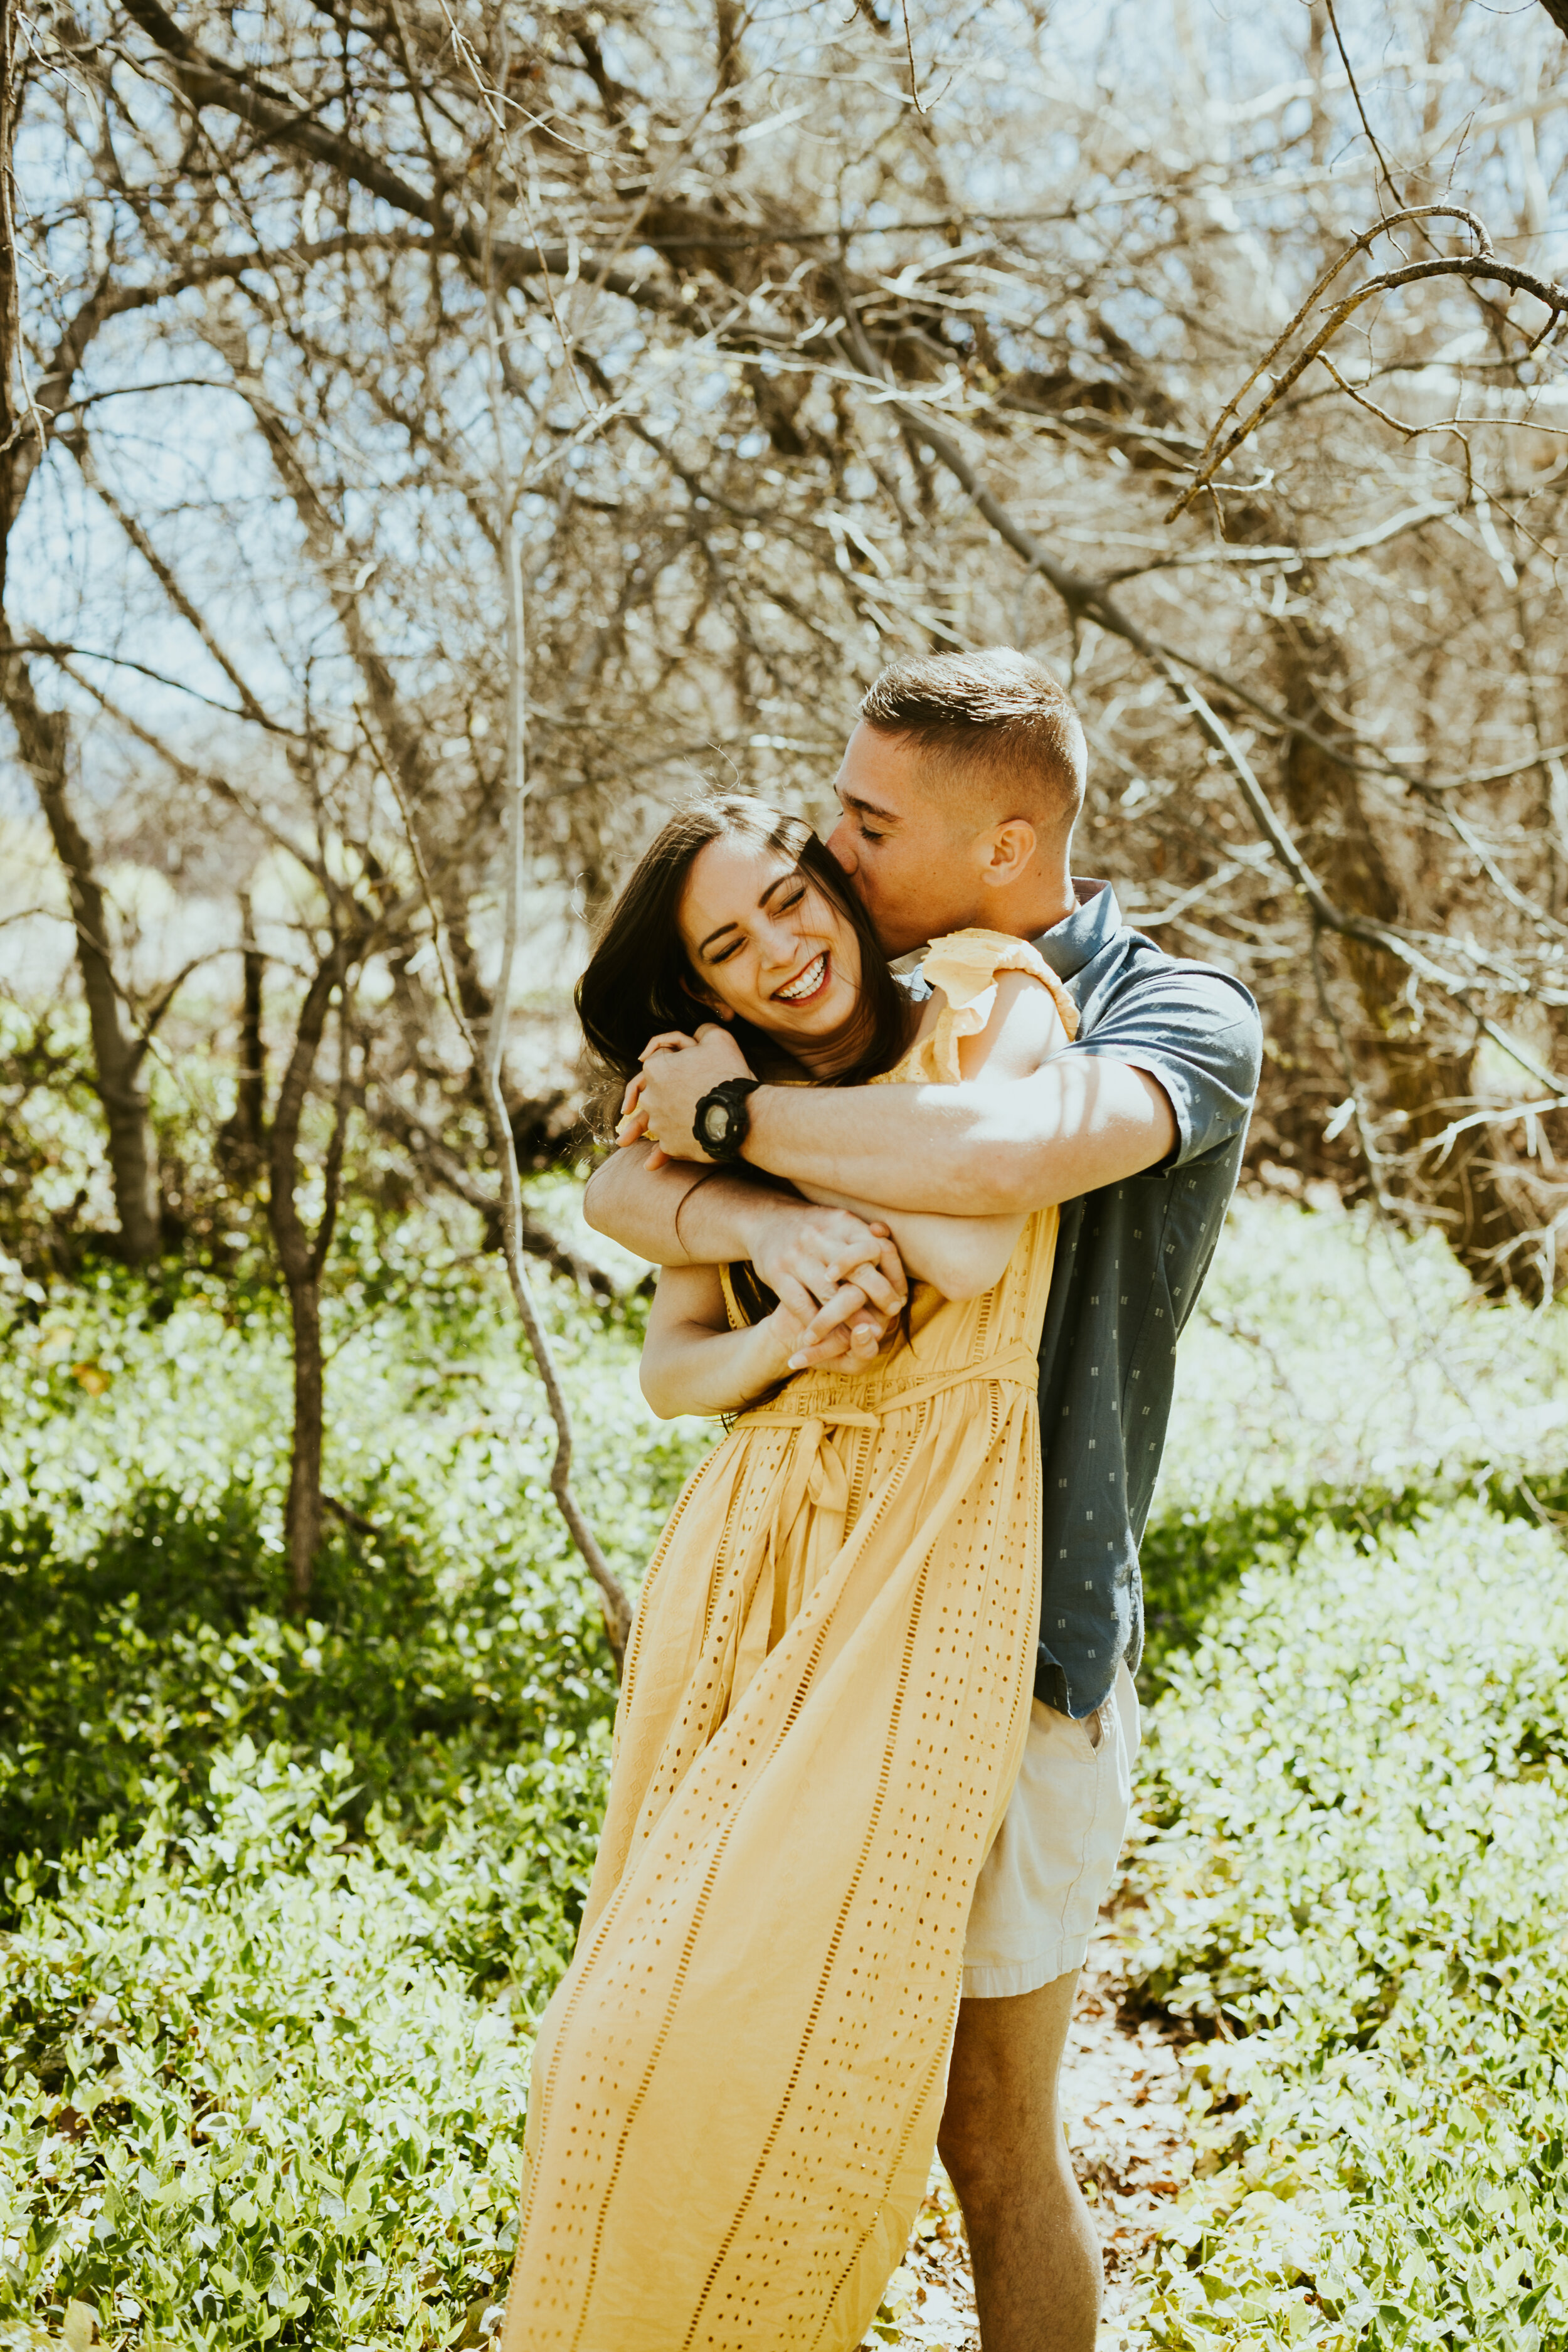 red rock crossing sedona arizona cathedral rock crescent moon ranch couple photos engagement photo outfit inspiration couple posing ideas midday photos anniversary photos-8.jpg